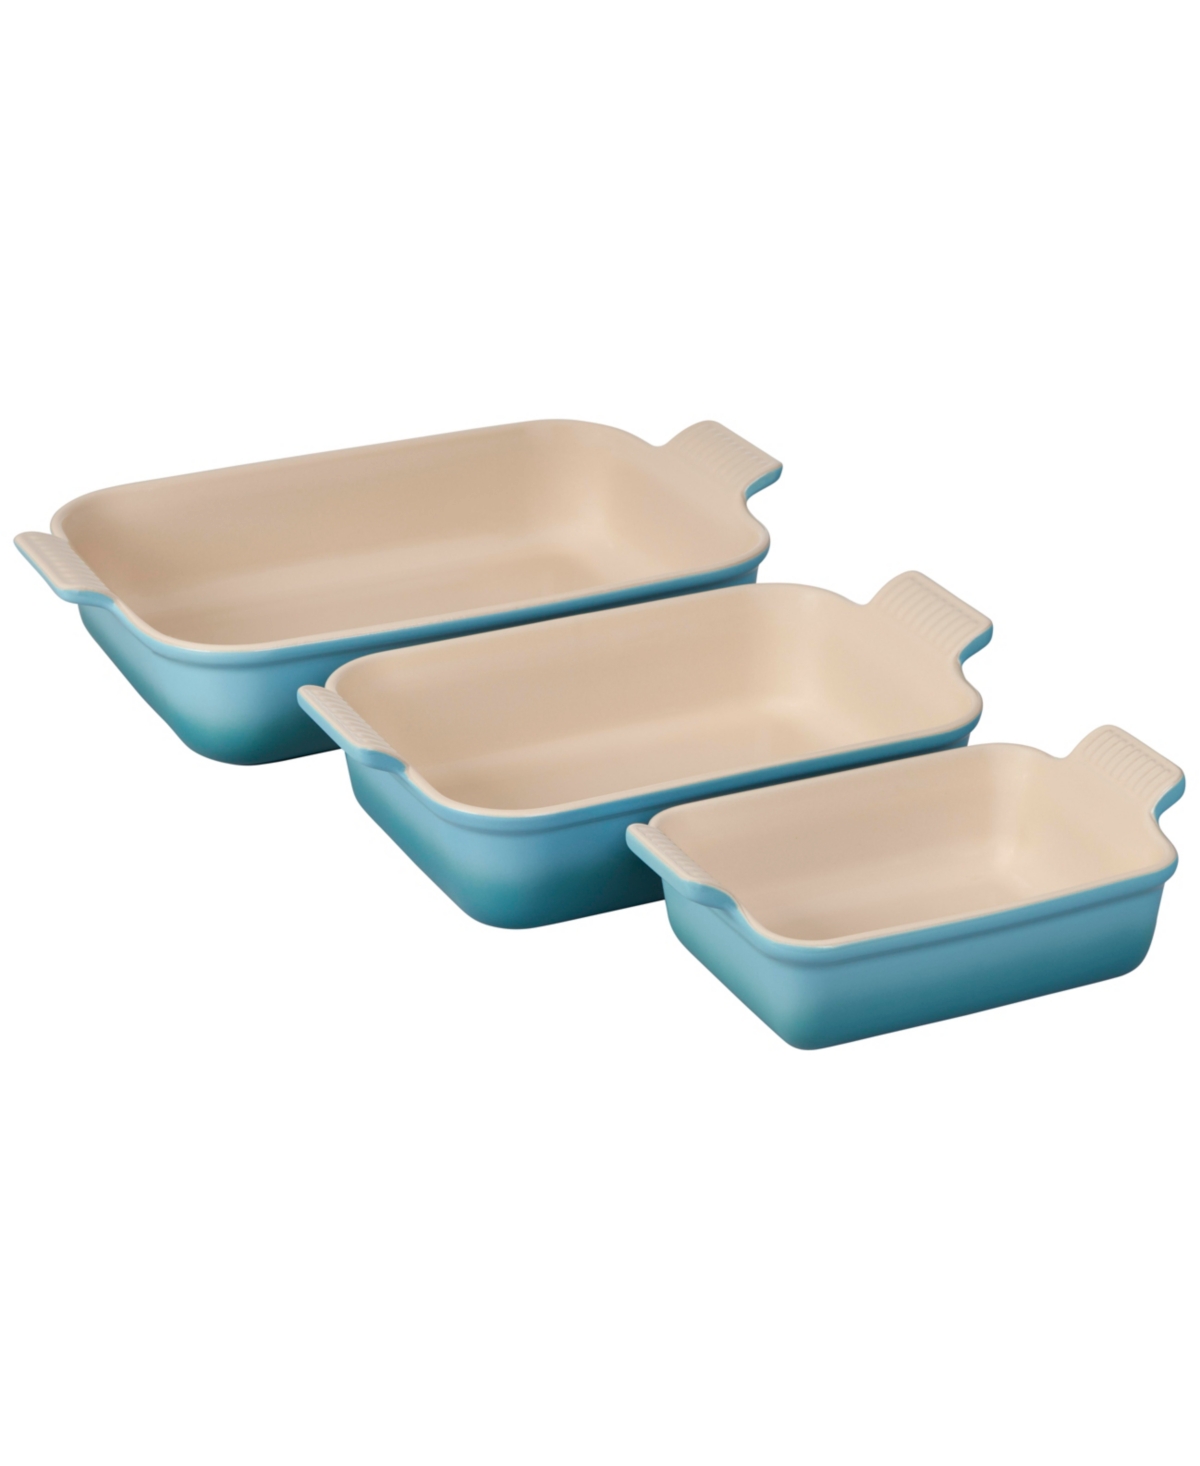 Le Creuset The Heritage Set Of 3 Rectangular Baking Dishes In Caribbean